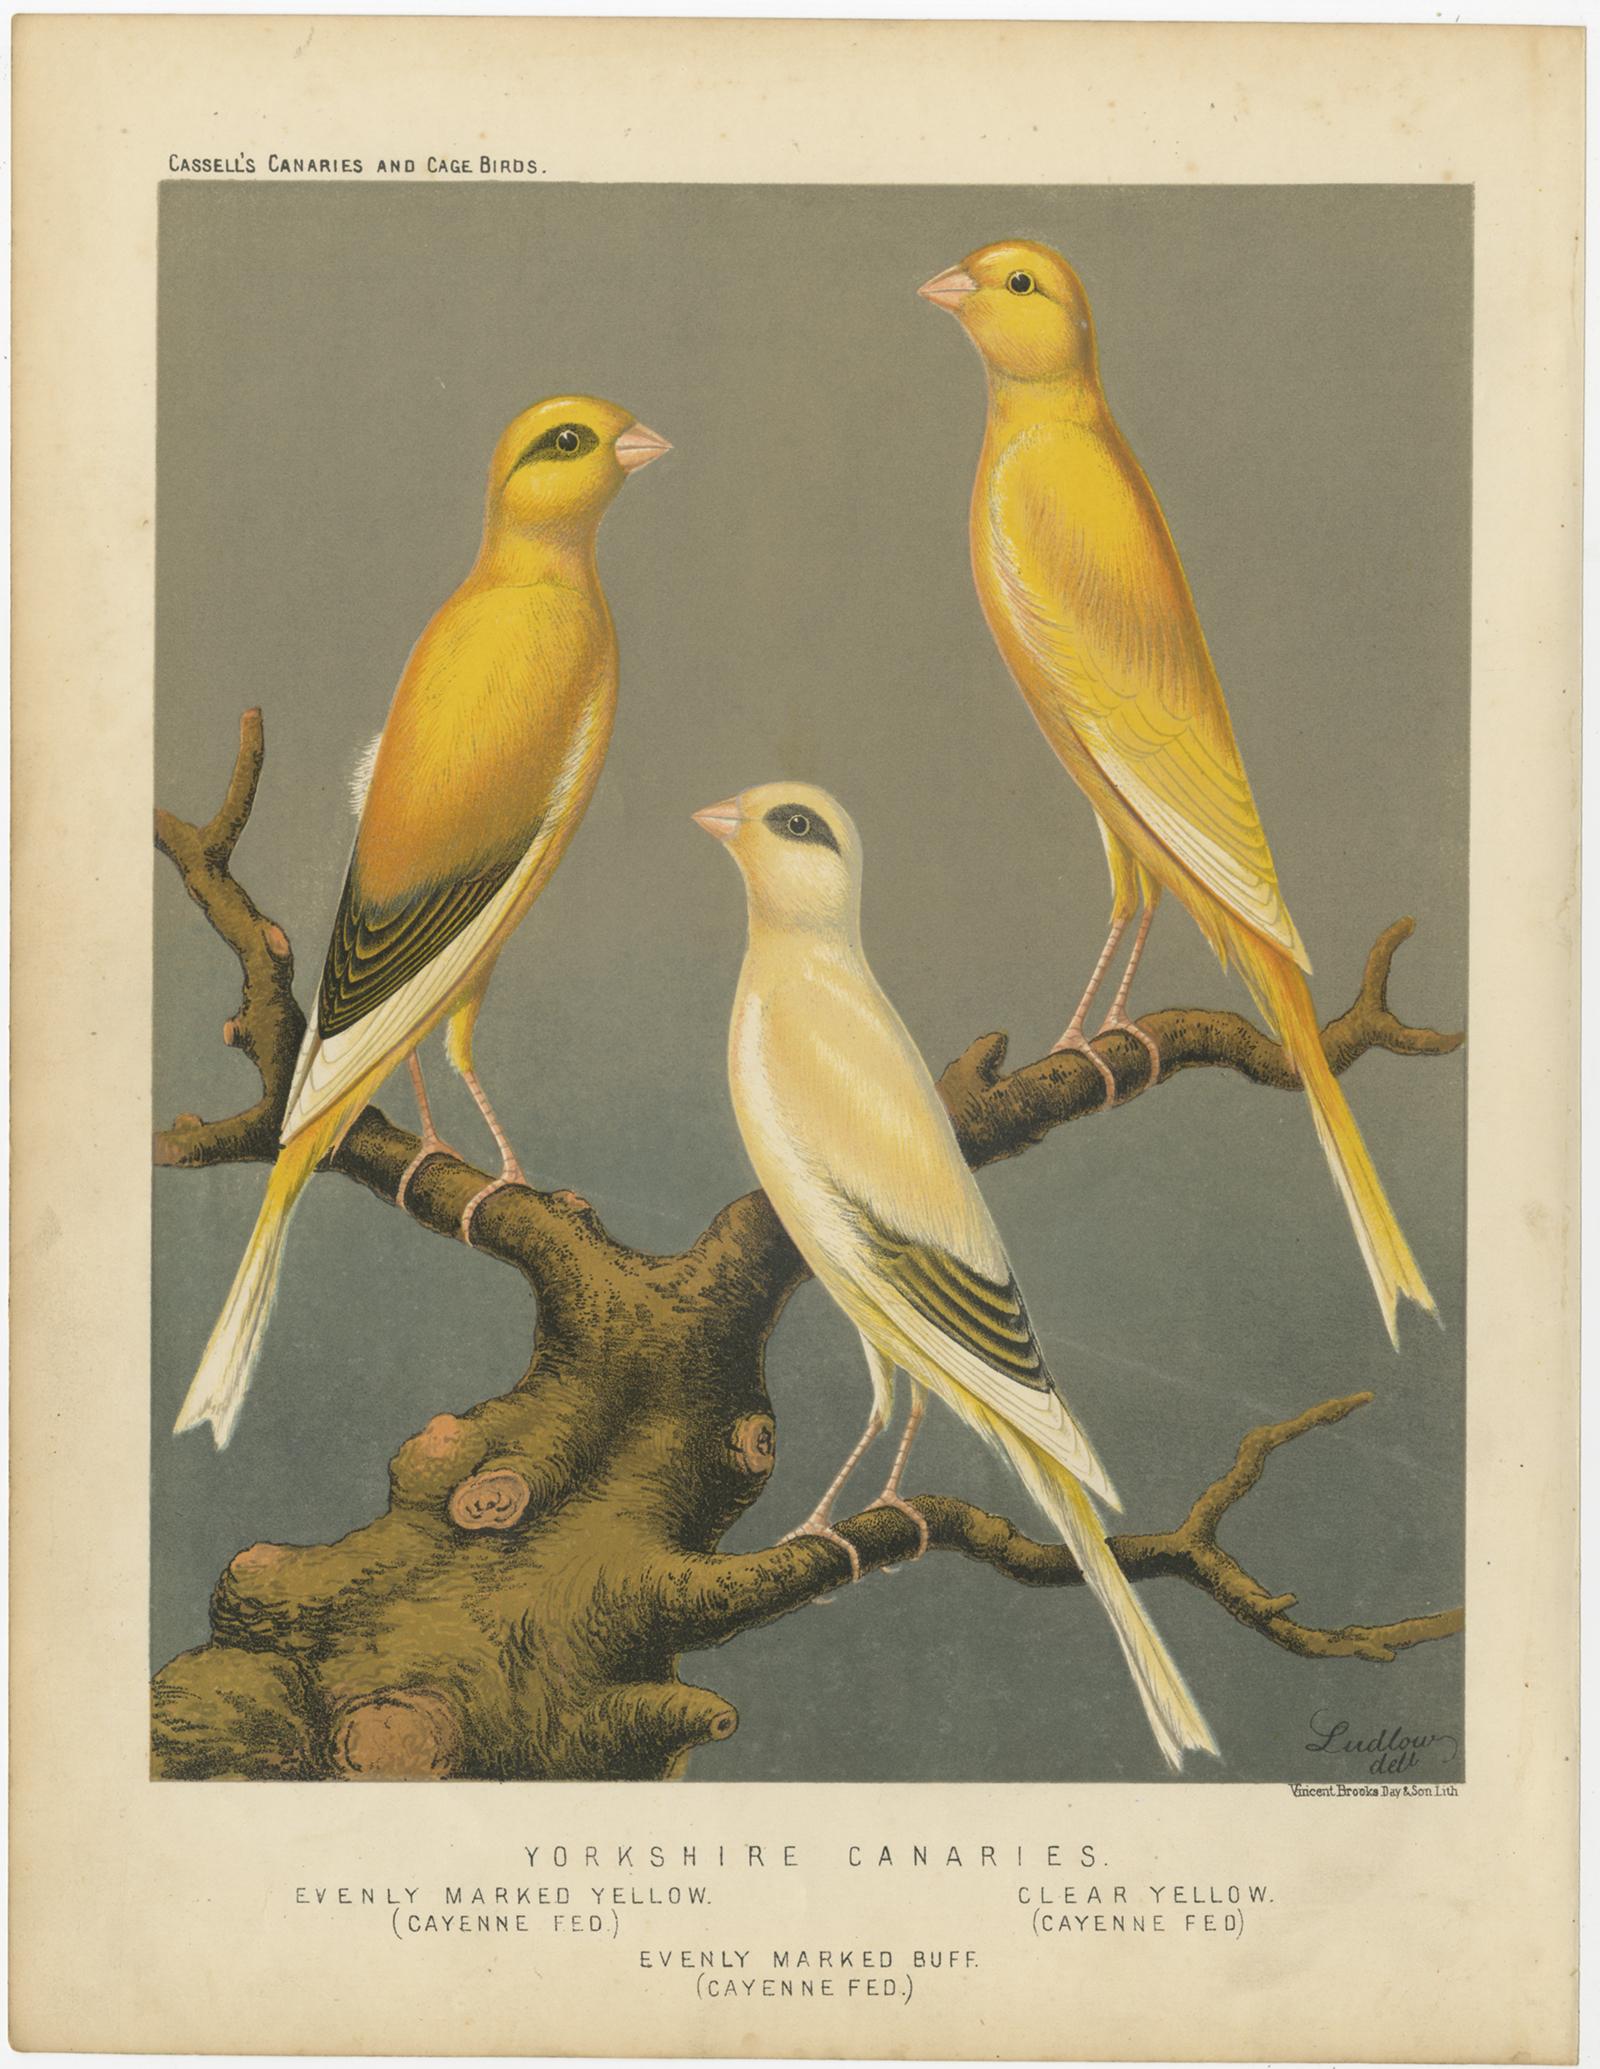 Antique bird print titled 'Yorkshire Canaries 1. Evenly Marked Yellow (Cayenne Fed) 2. Evenly Marked Buff (Cayenne Fed) 3. Clear Yellow (Cayenne Fed)' Old bird print depicting the Yorkshire Canaries: Evenly Marked Yellow, Evenly Marked Buff, Clear